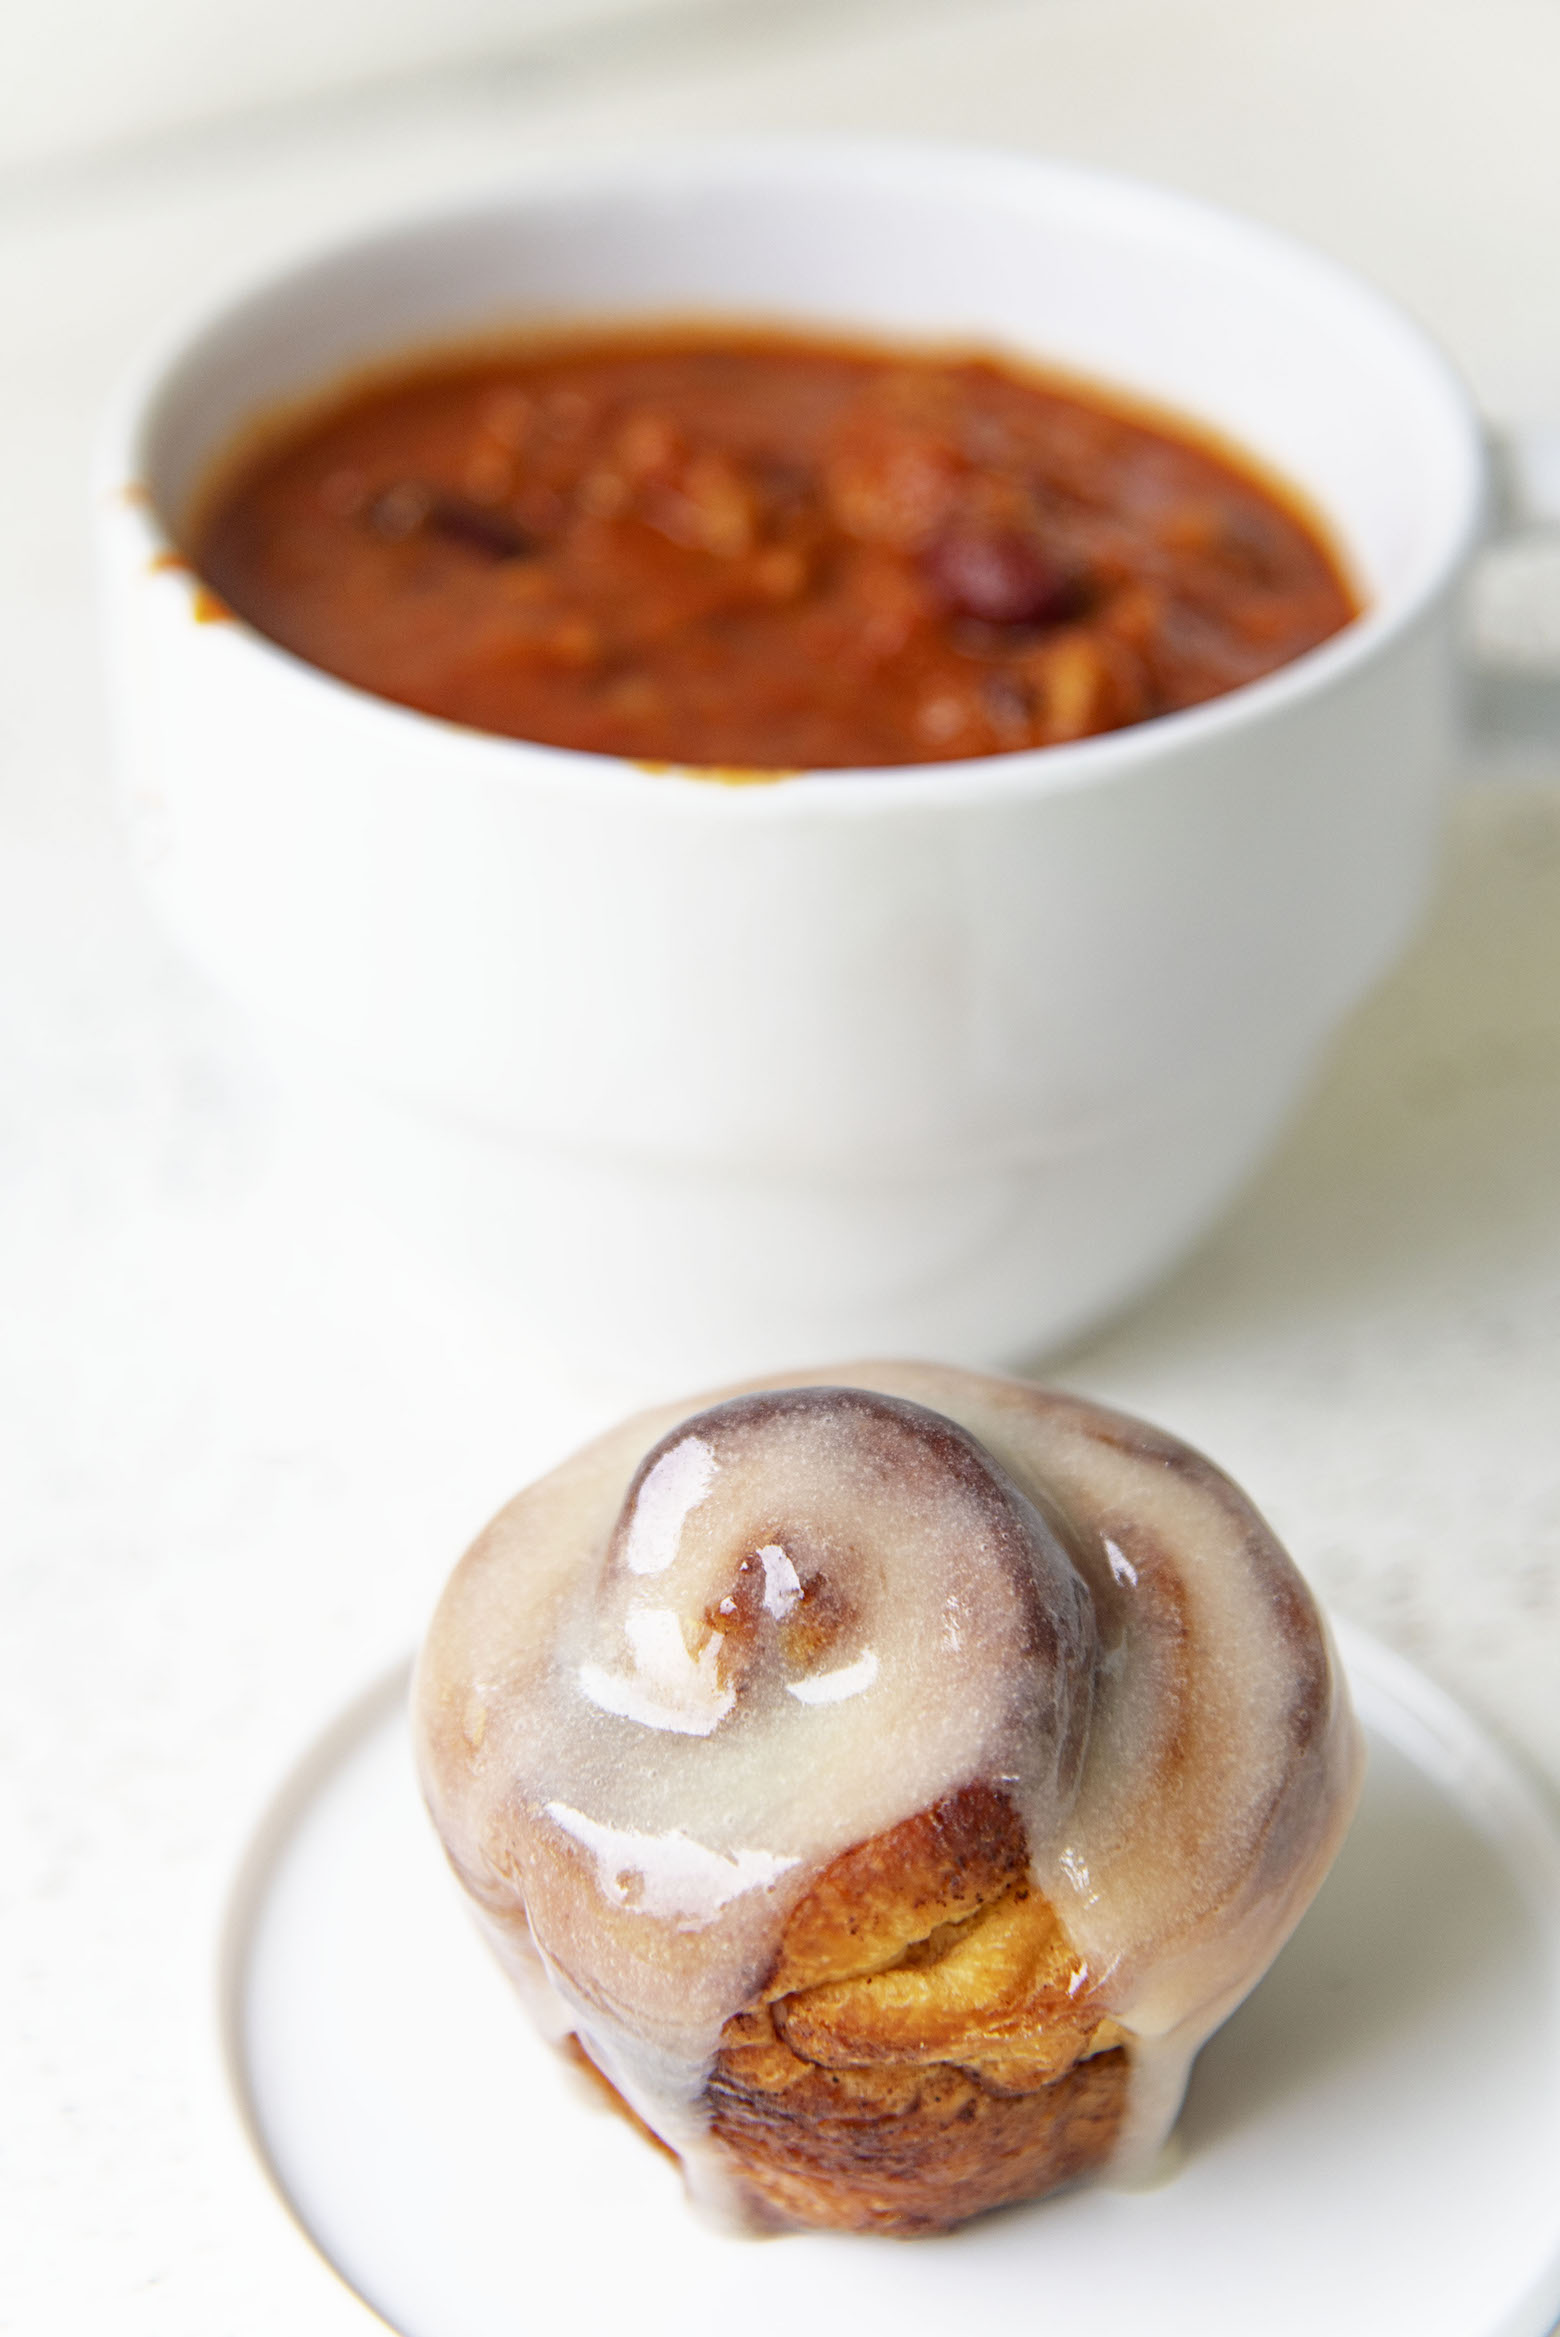 Cinnamon roll on a plate in front of a bowl of chili. 